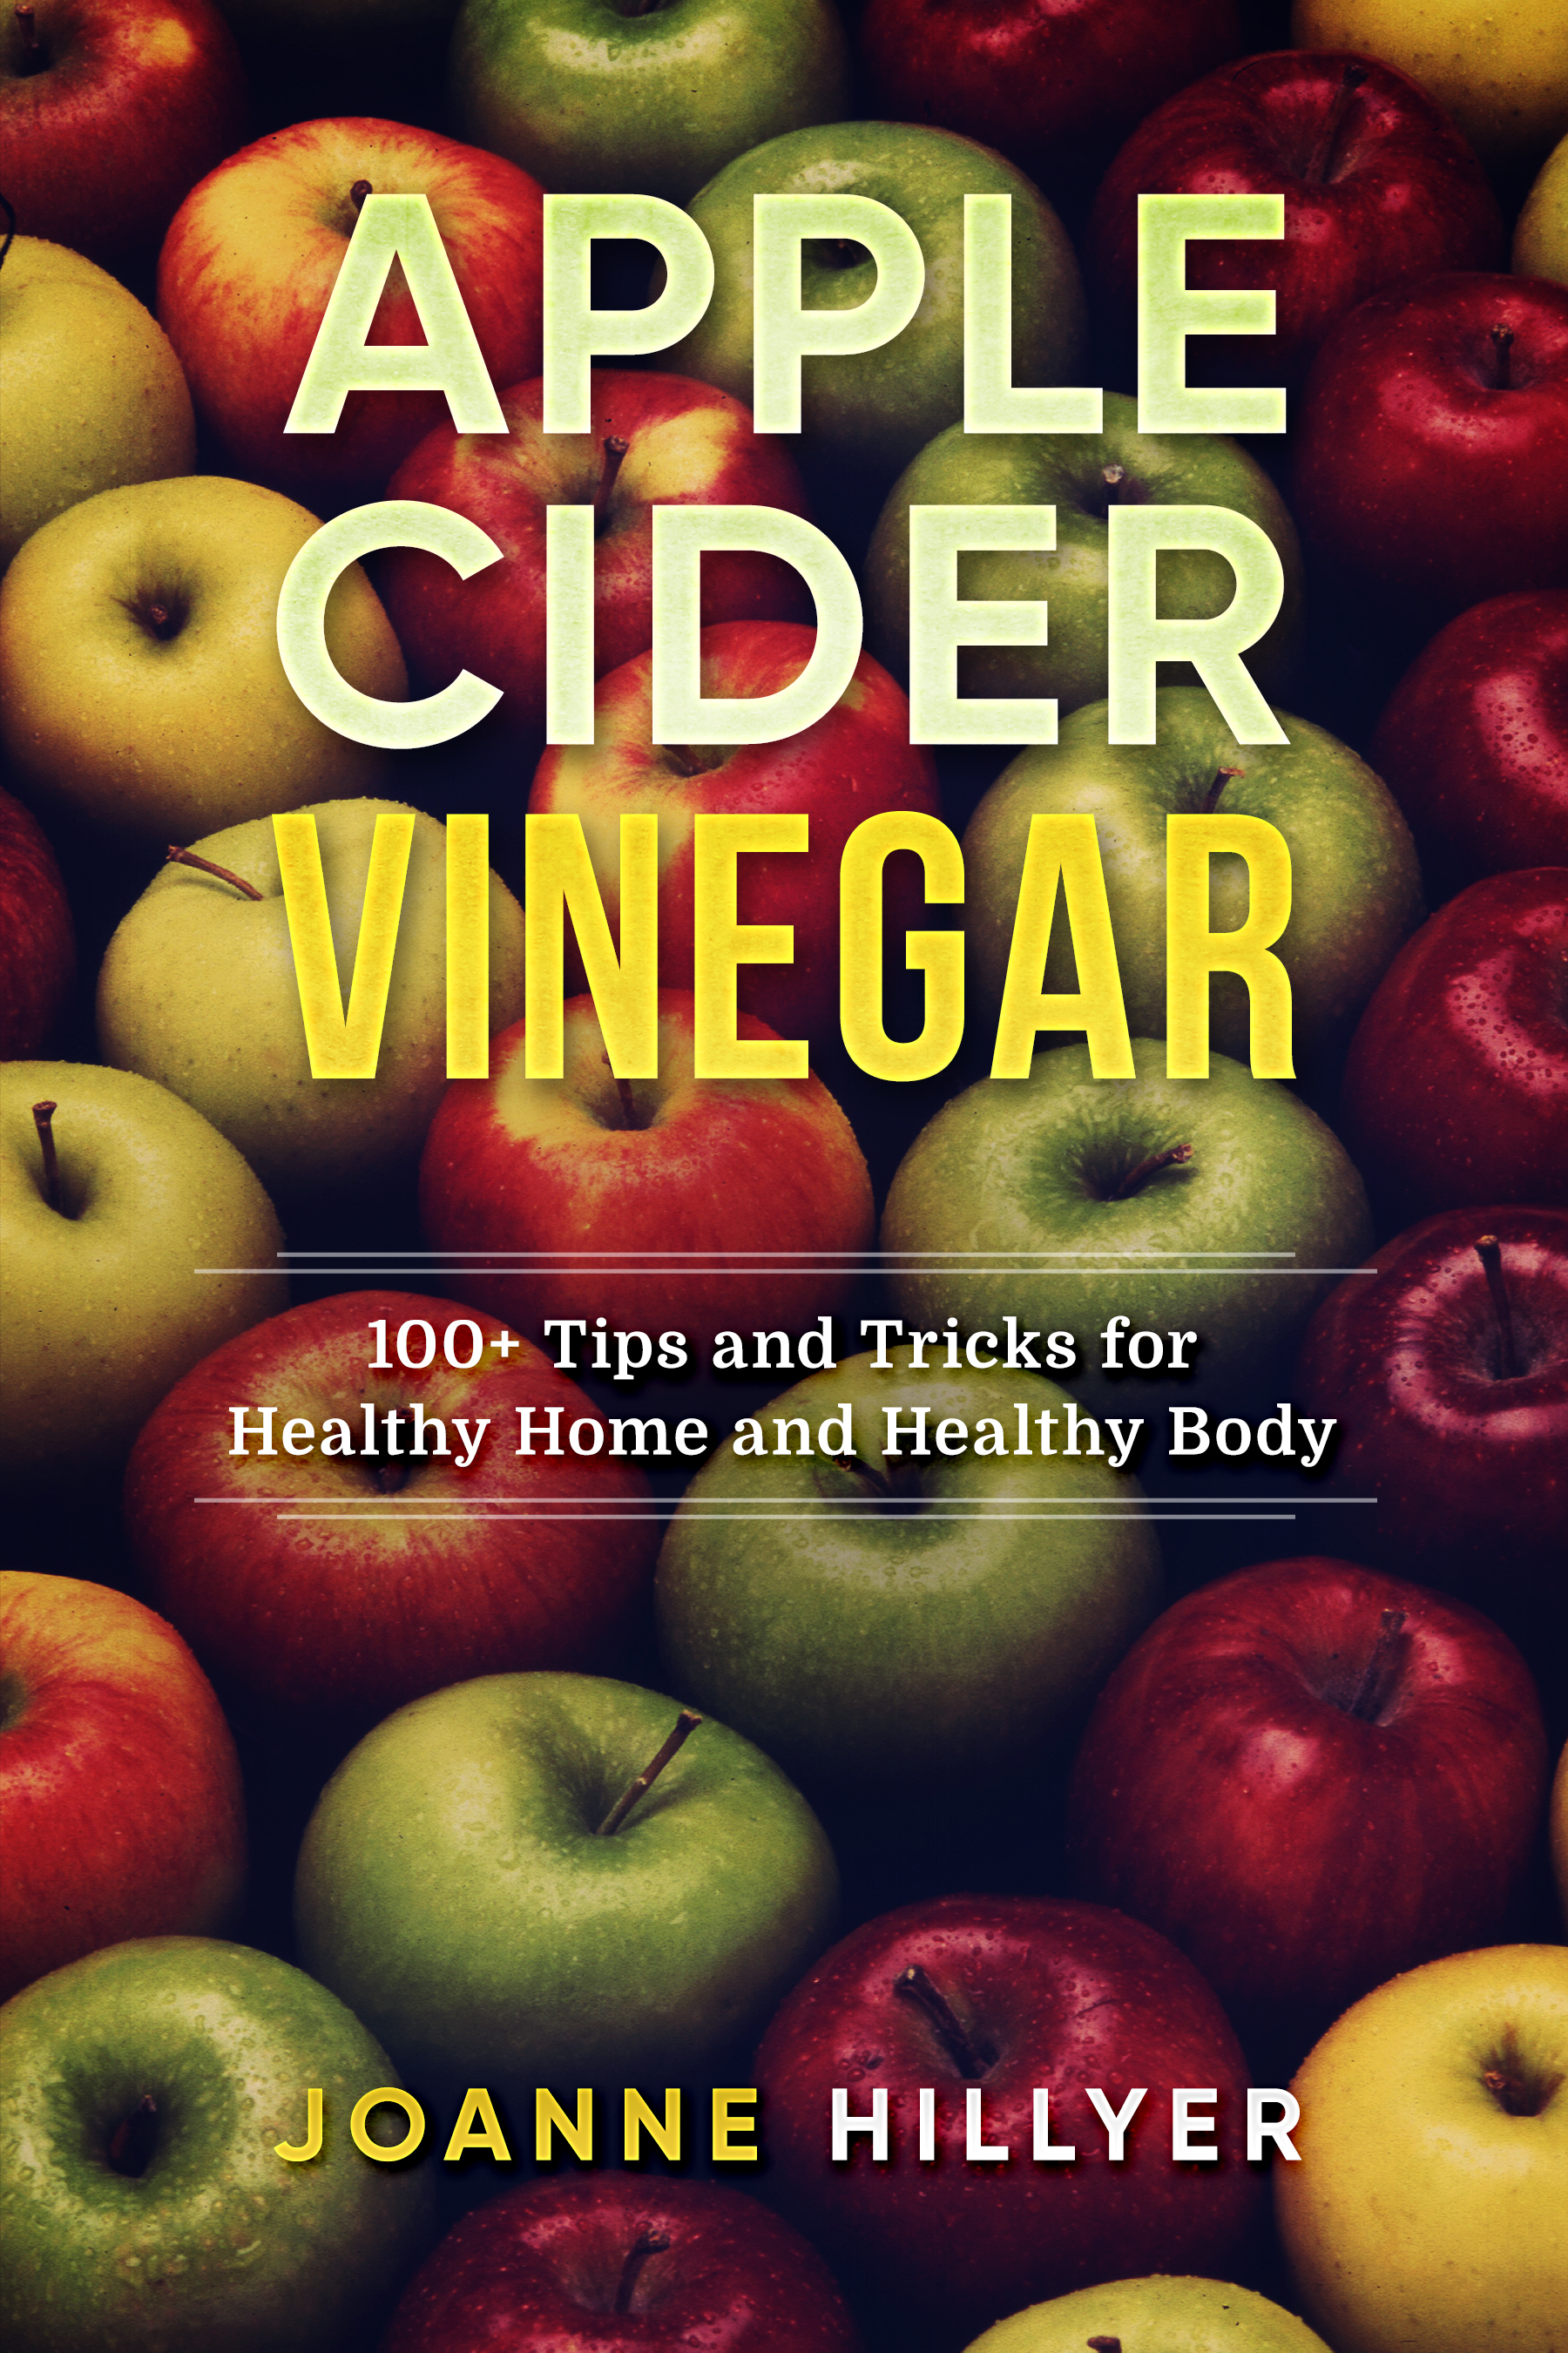 FREE: Apple Cider Vinegar: 100+ Tips and Tricks for Healthy Home and Healthy Body by Joanne Hillyer